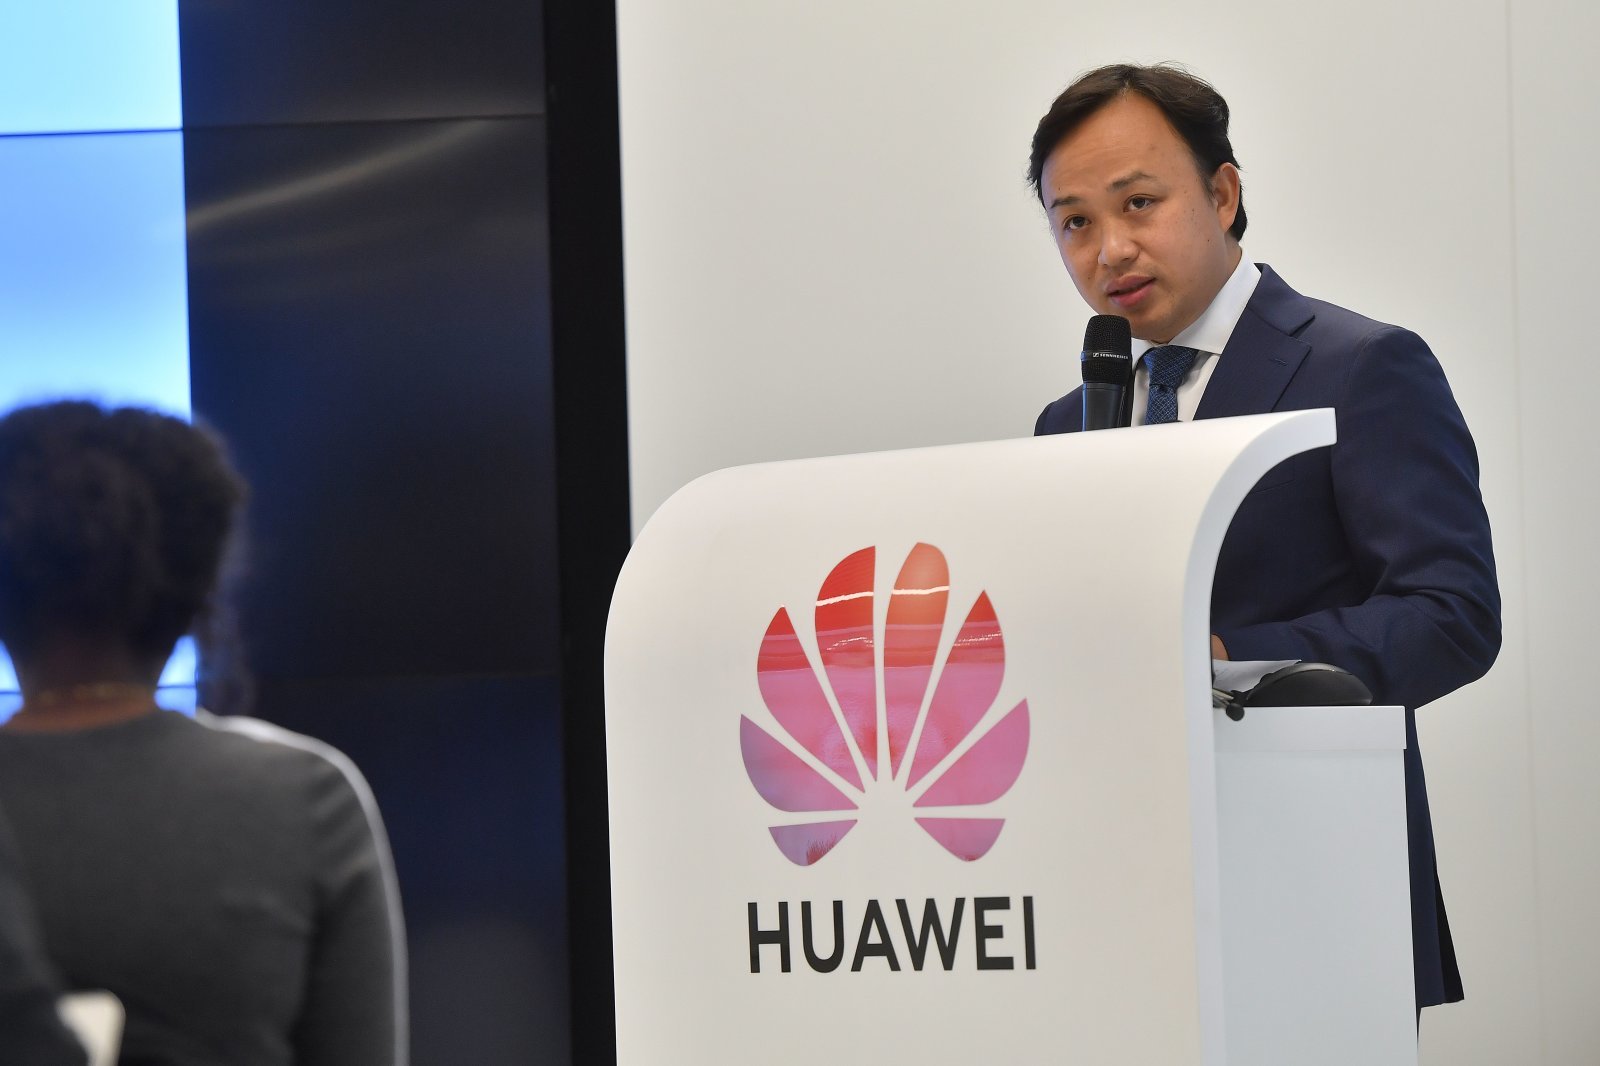 Huawei Chief Representative to the European Institutions Abraham Liu addresses a press conference at Huawei Cybersecurity Center on May 21, 2019 in Brussels. - Washington last week imposed a ban on the sale or transfer of American technology to the firm which could impact hundreds of millions of Huawei phones and tablets around the world. (Photo by EMMANUEL DUNAND / AFP)        (Photo credit should read EMMANUEL DUNAND/AFP/Getty Images)